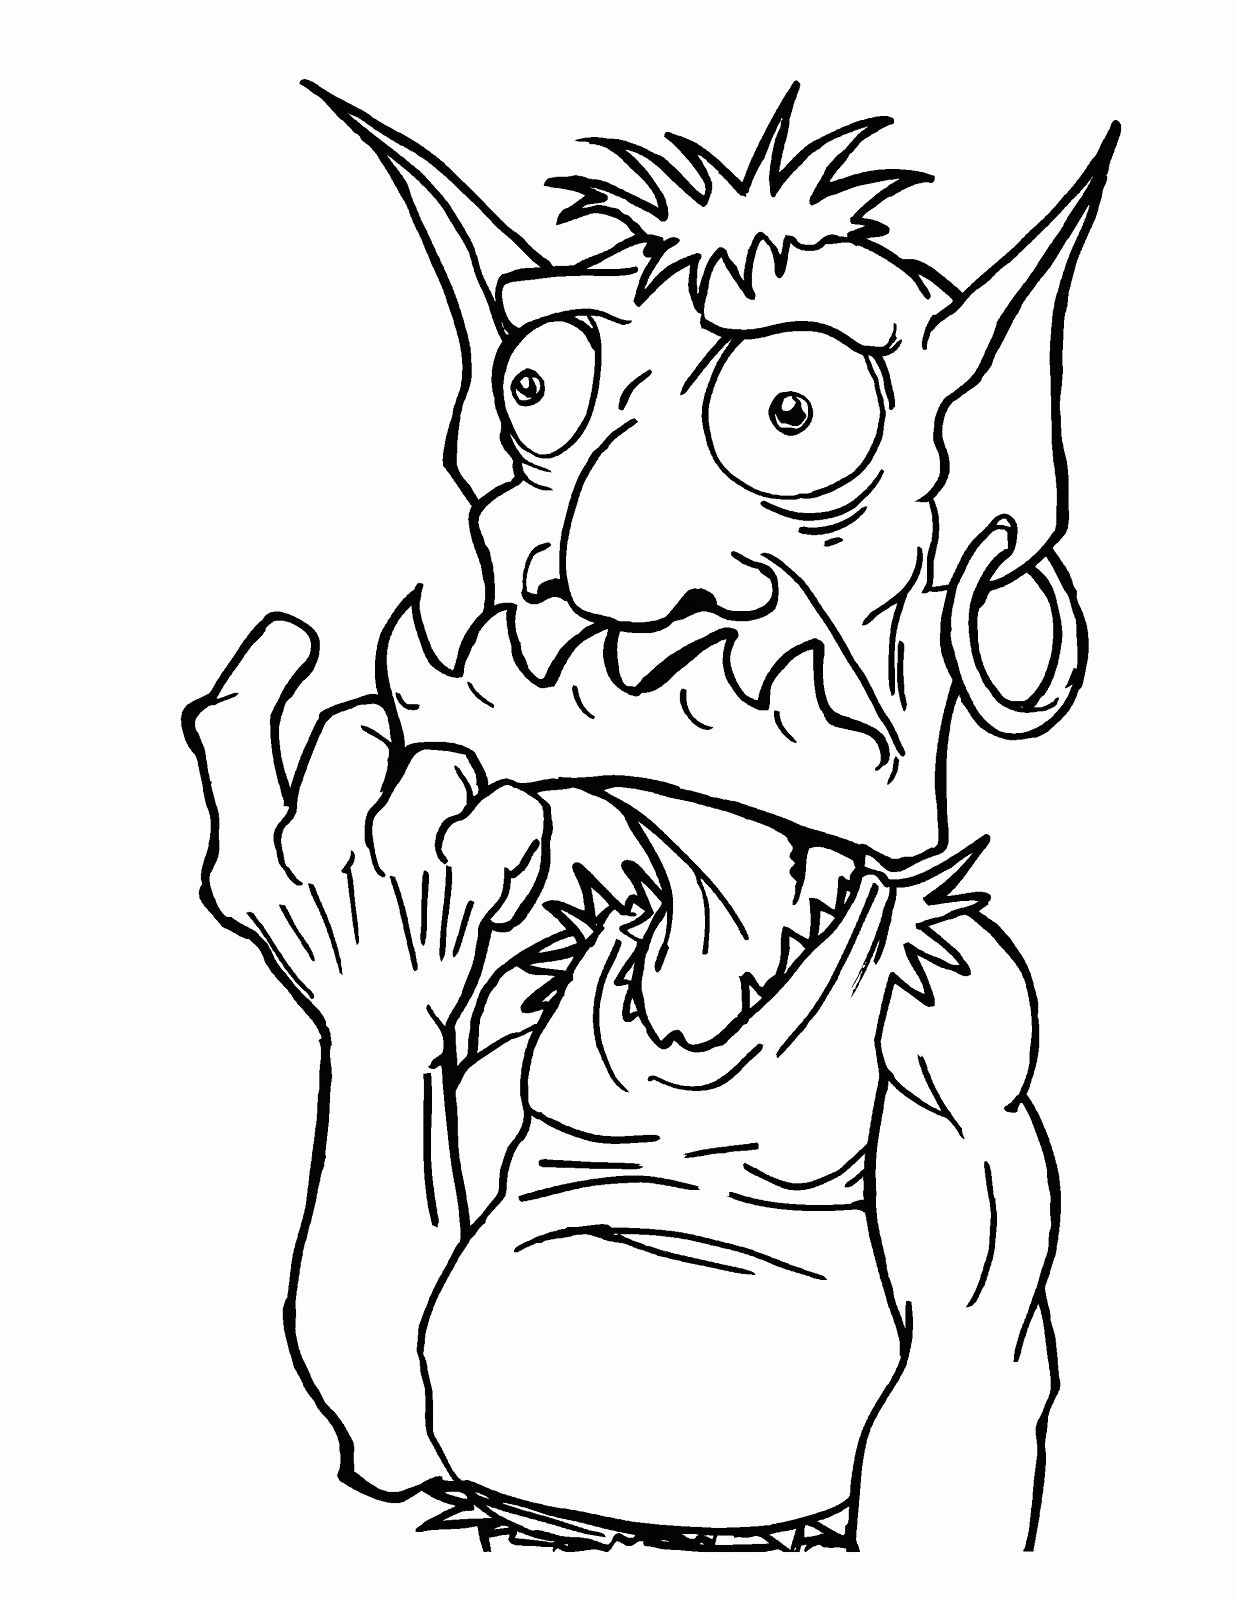 Goblin coloring pages